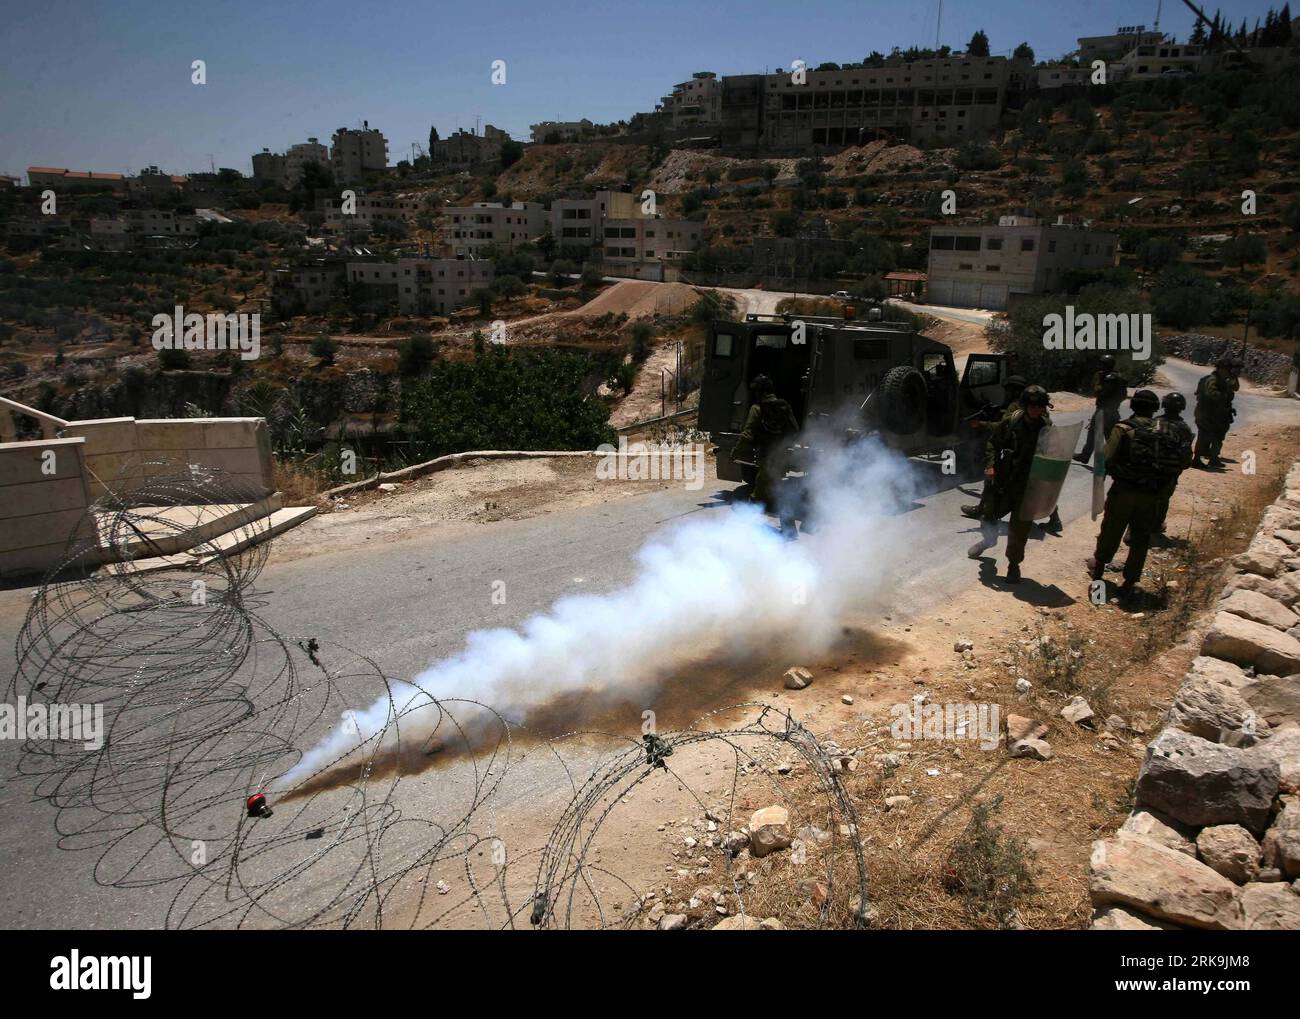 Bildnummer: 54203465  Datum: 04.07.2010  Copyright: imago/Xinhua (100704)-- BETHLEHEM, July 4, 2010 (Xinhua) -- Israeli soldiers take cover from a tear-gas canister thrown back by protester during a Palestinian demonstration against Israel s separation wall in the West Bank town of Beit Jala near Bethlehem, July 4, 2010. (Xinhua/Luay Sababa)(zl) (2)MIDEAST-BETHLEHEM-DEMONSTRATION PUBLICATIONxNOTxINxCHN Gesellschaft Militär Übung Militärübung kbdig xdp 2010 quer premiumd xint o0 Tränengas    Bildnummer 54203465 Date 04 07 2010 Copyright Imago XINHUA  Bethlehem July 4 2010 XINHUA Israeli Soldier Stock Photo